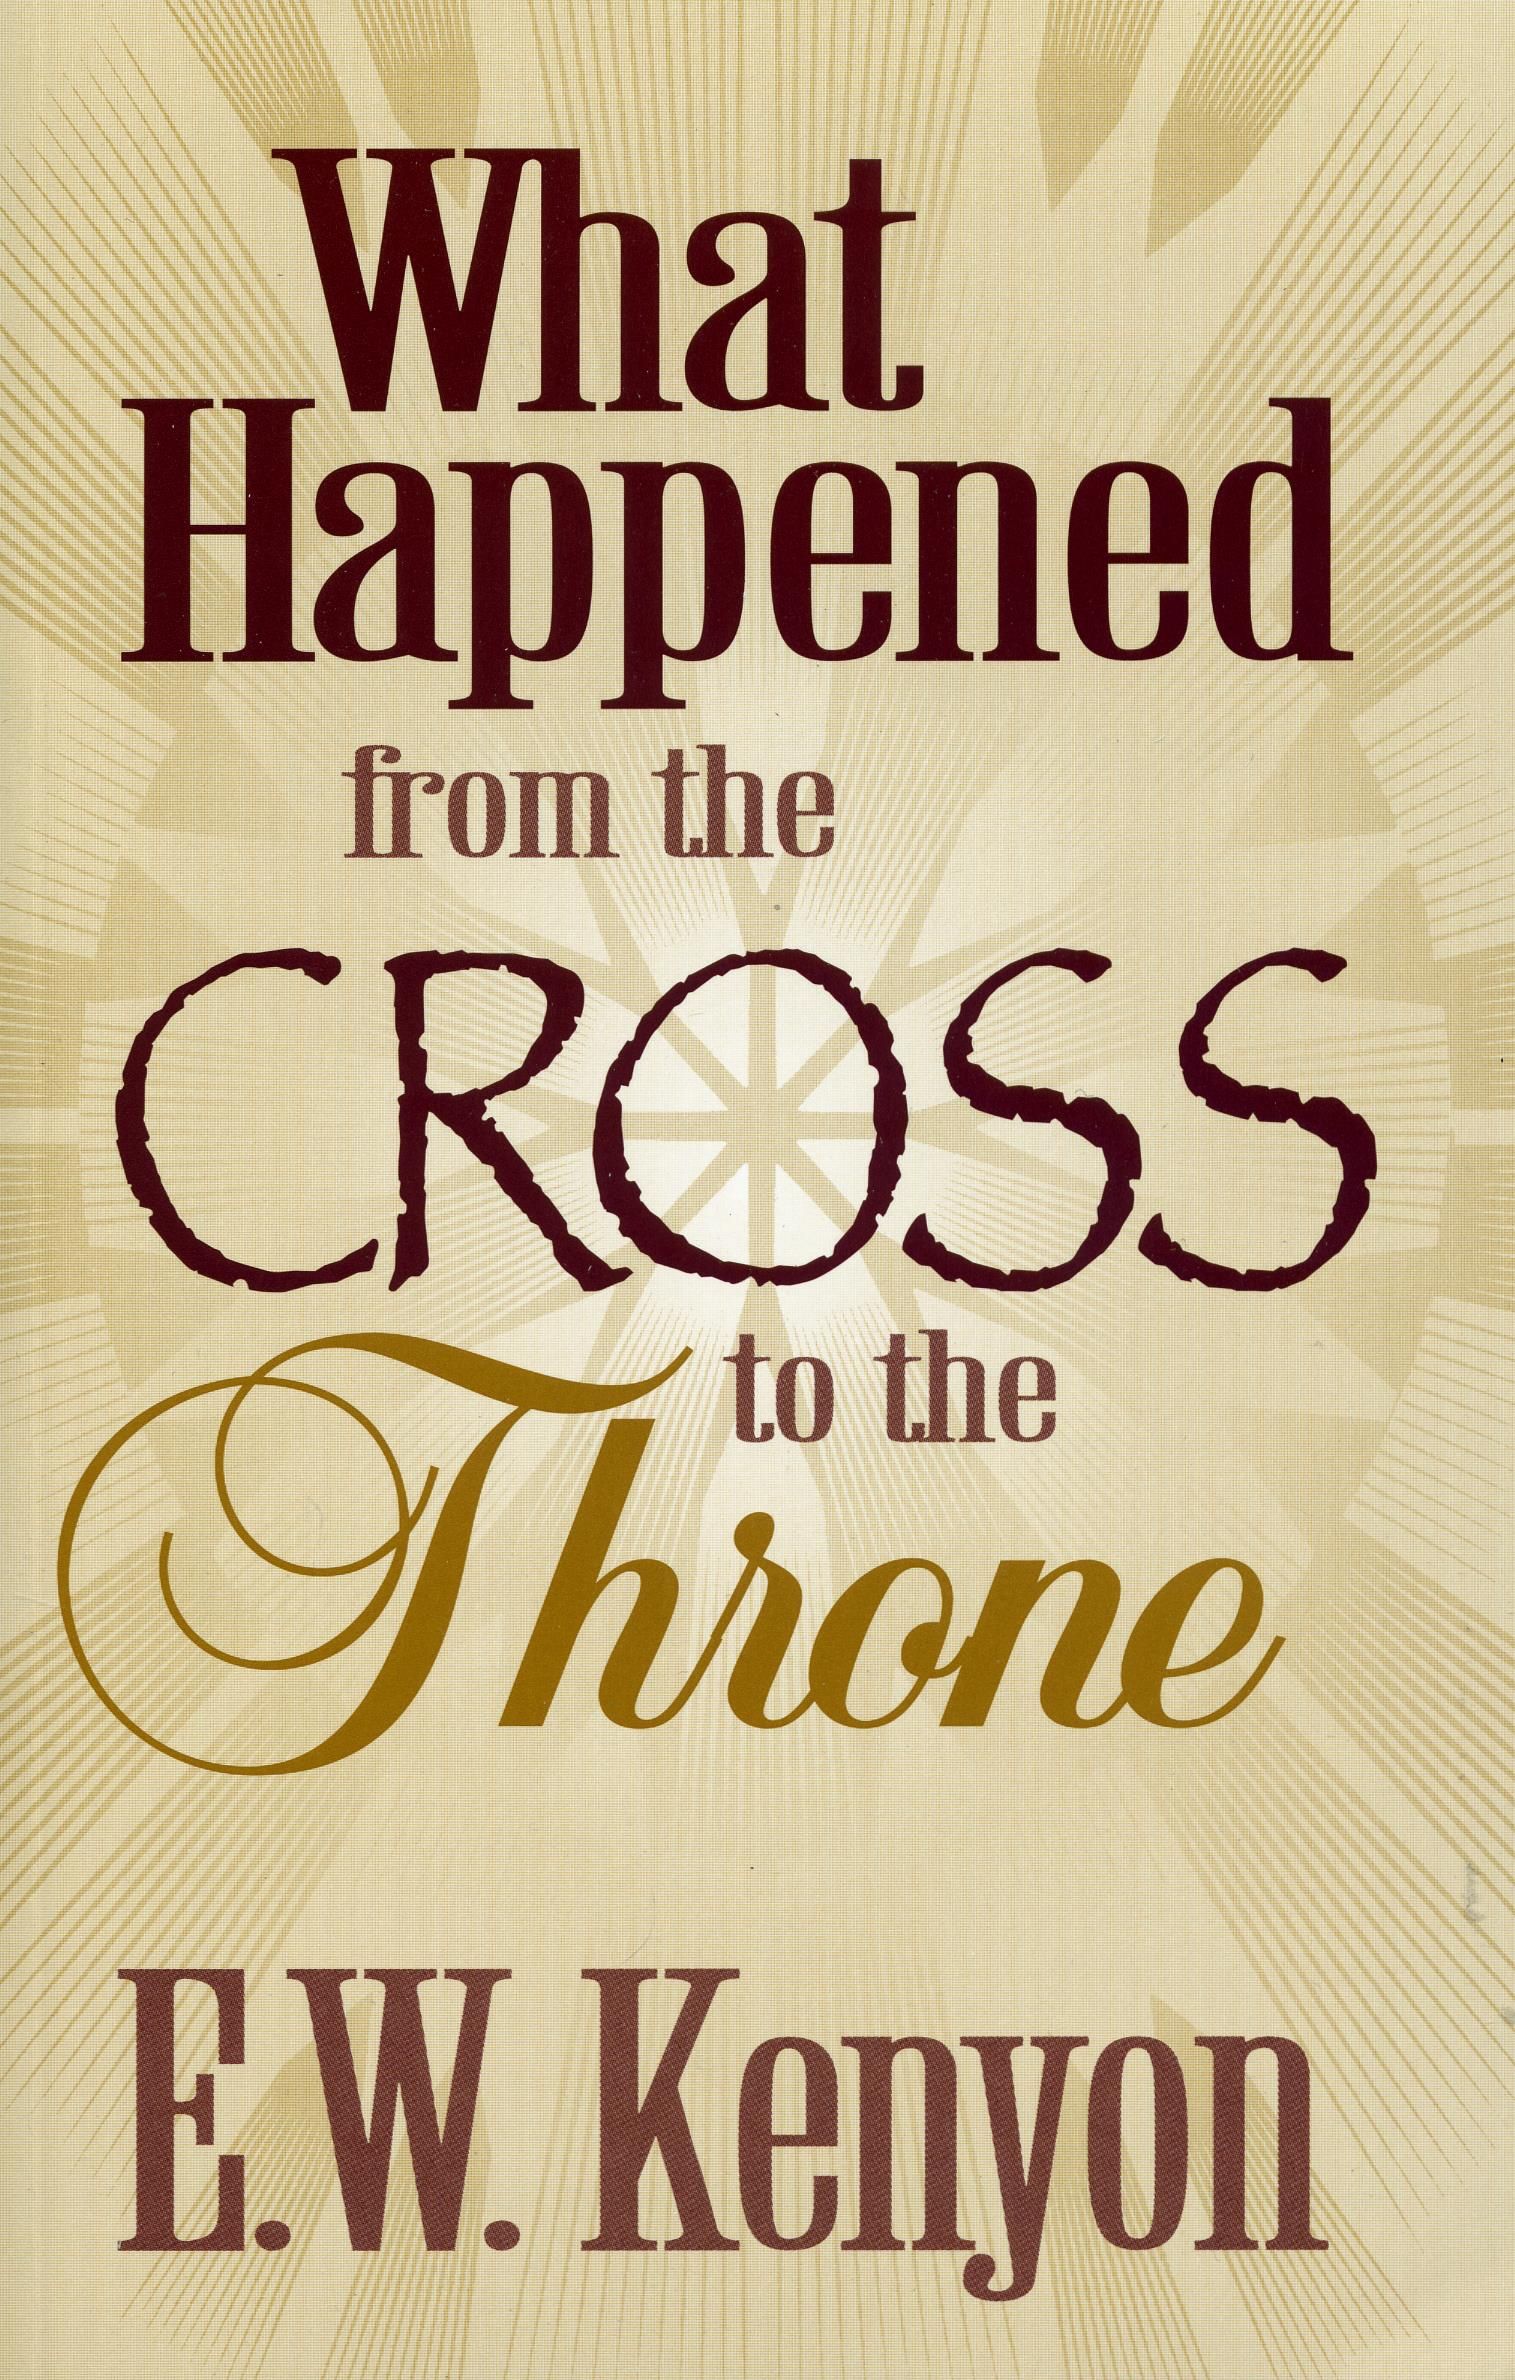 E.W. Kenyon: What happened from the Cross to the Throne?